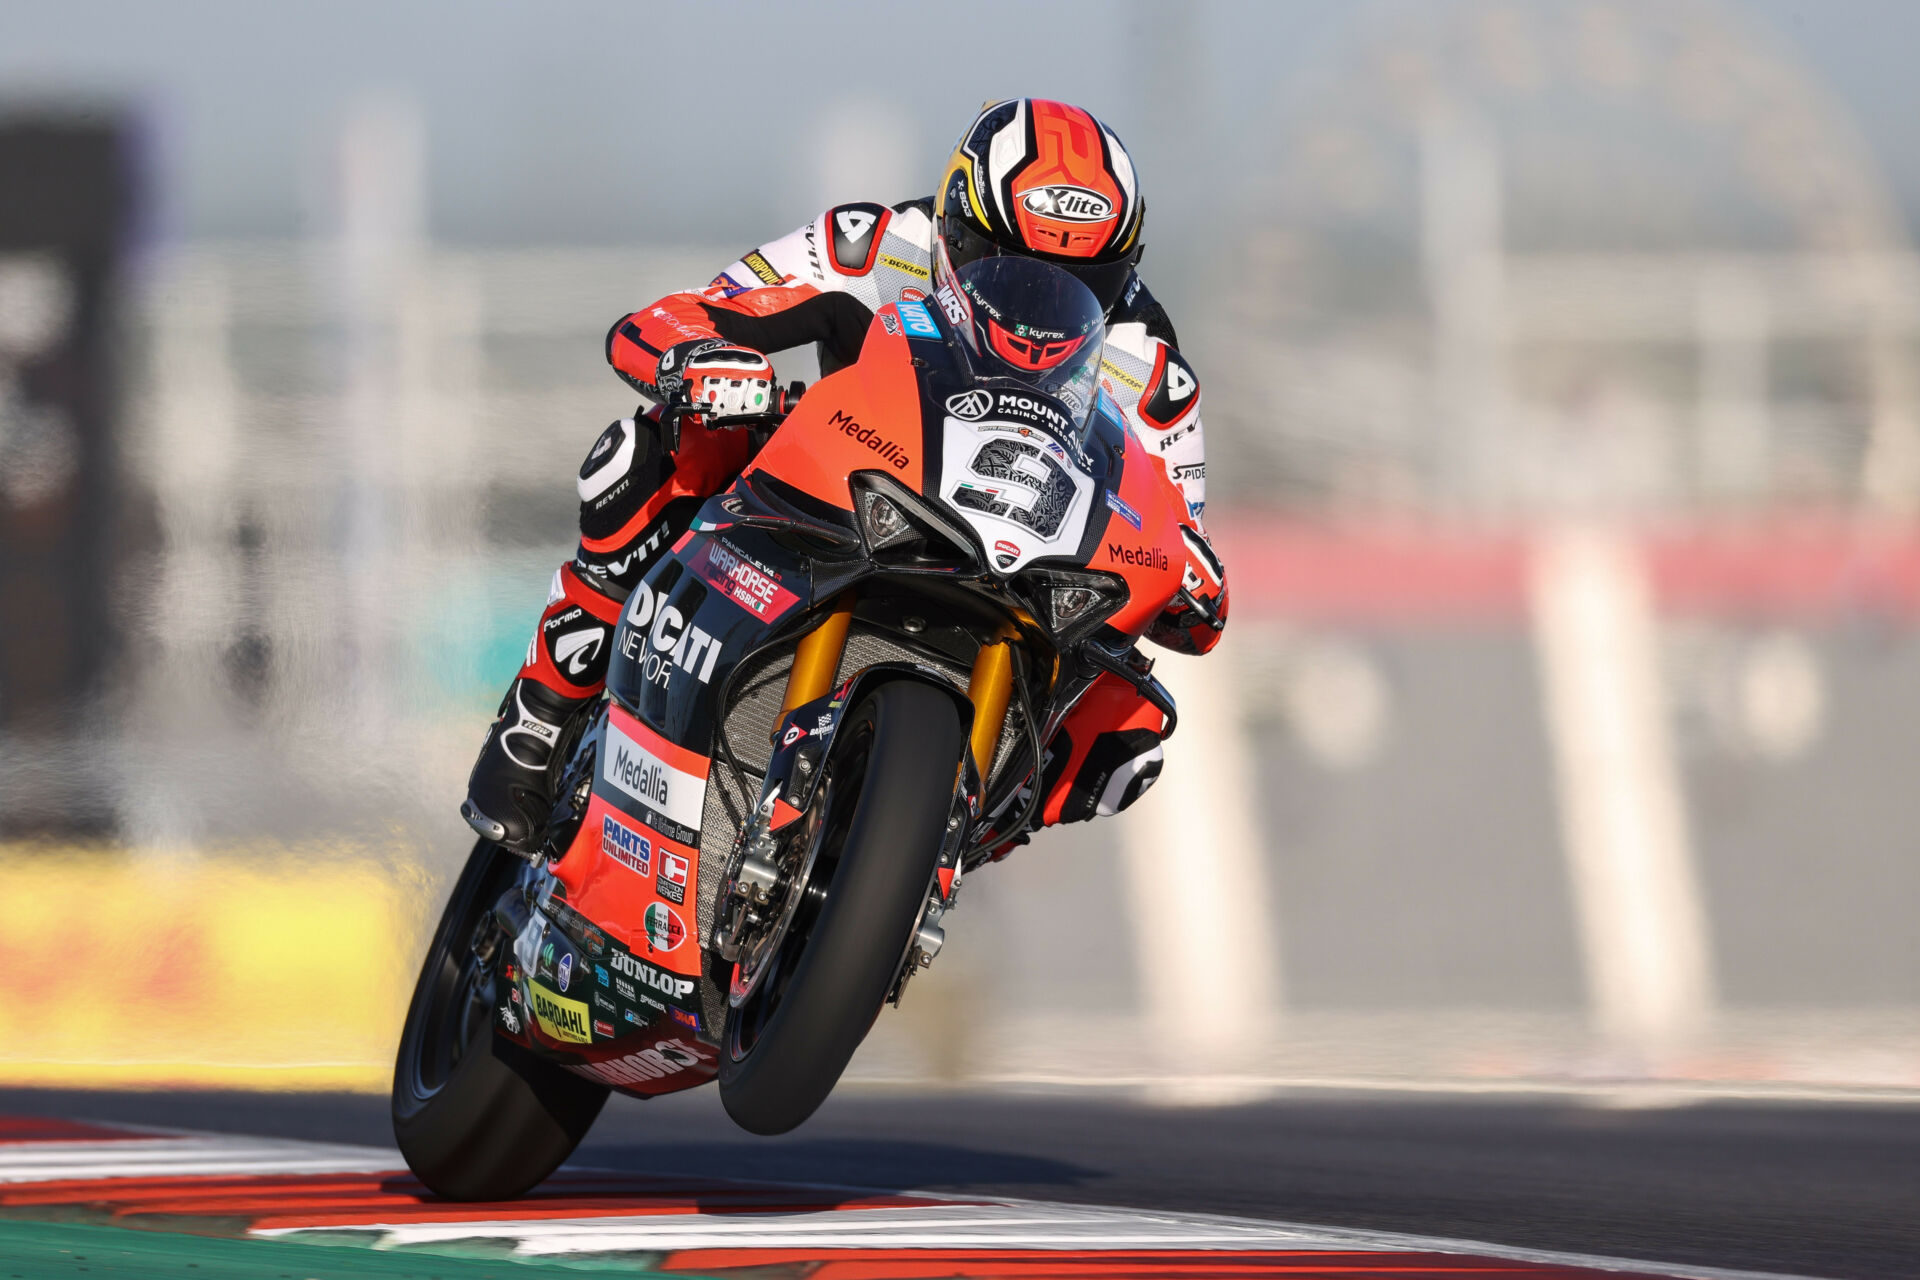 MotoAmerica: Who Will Ride For Ducati In 2023? World Magazine. Motorcycle Riding, Racing & Tech News